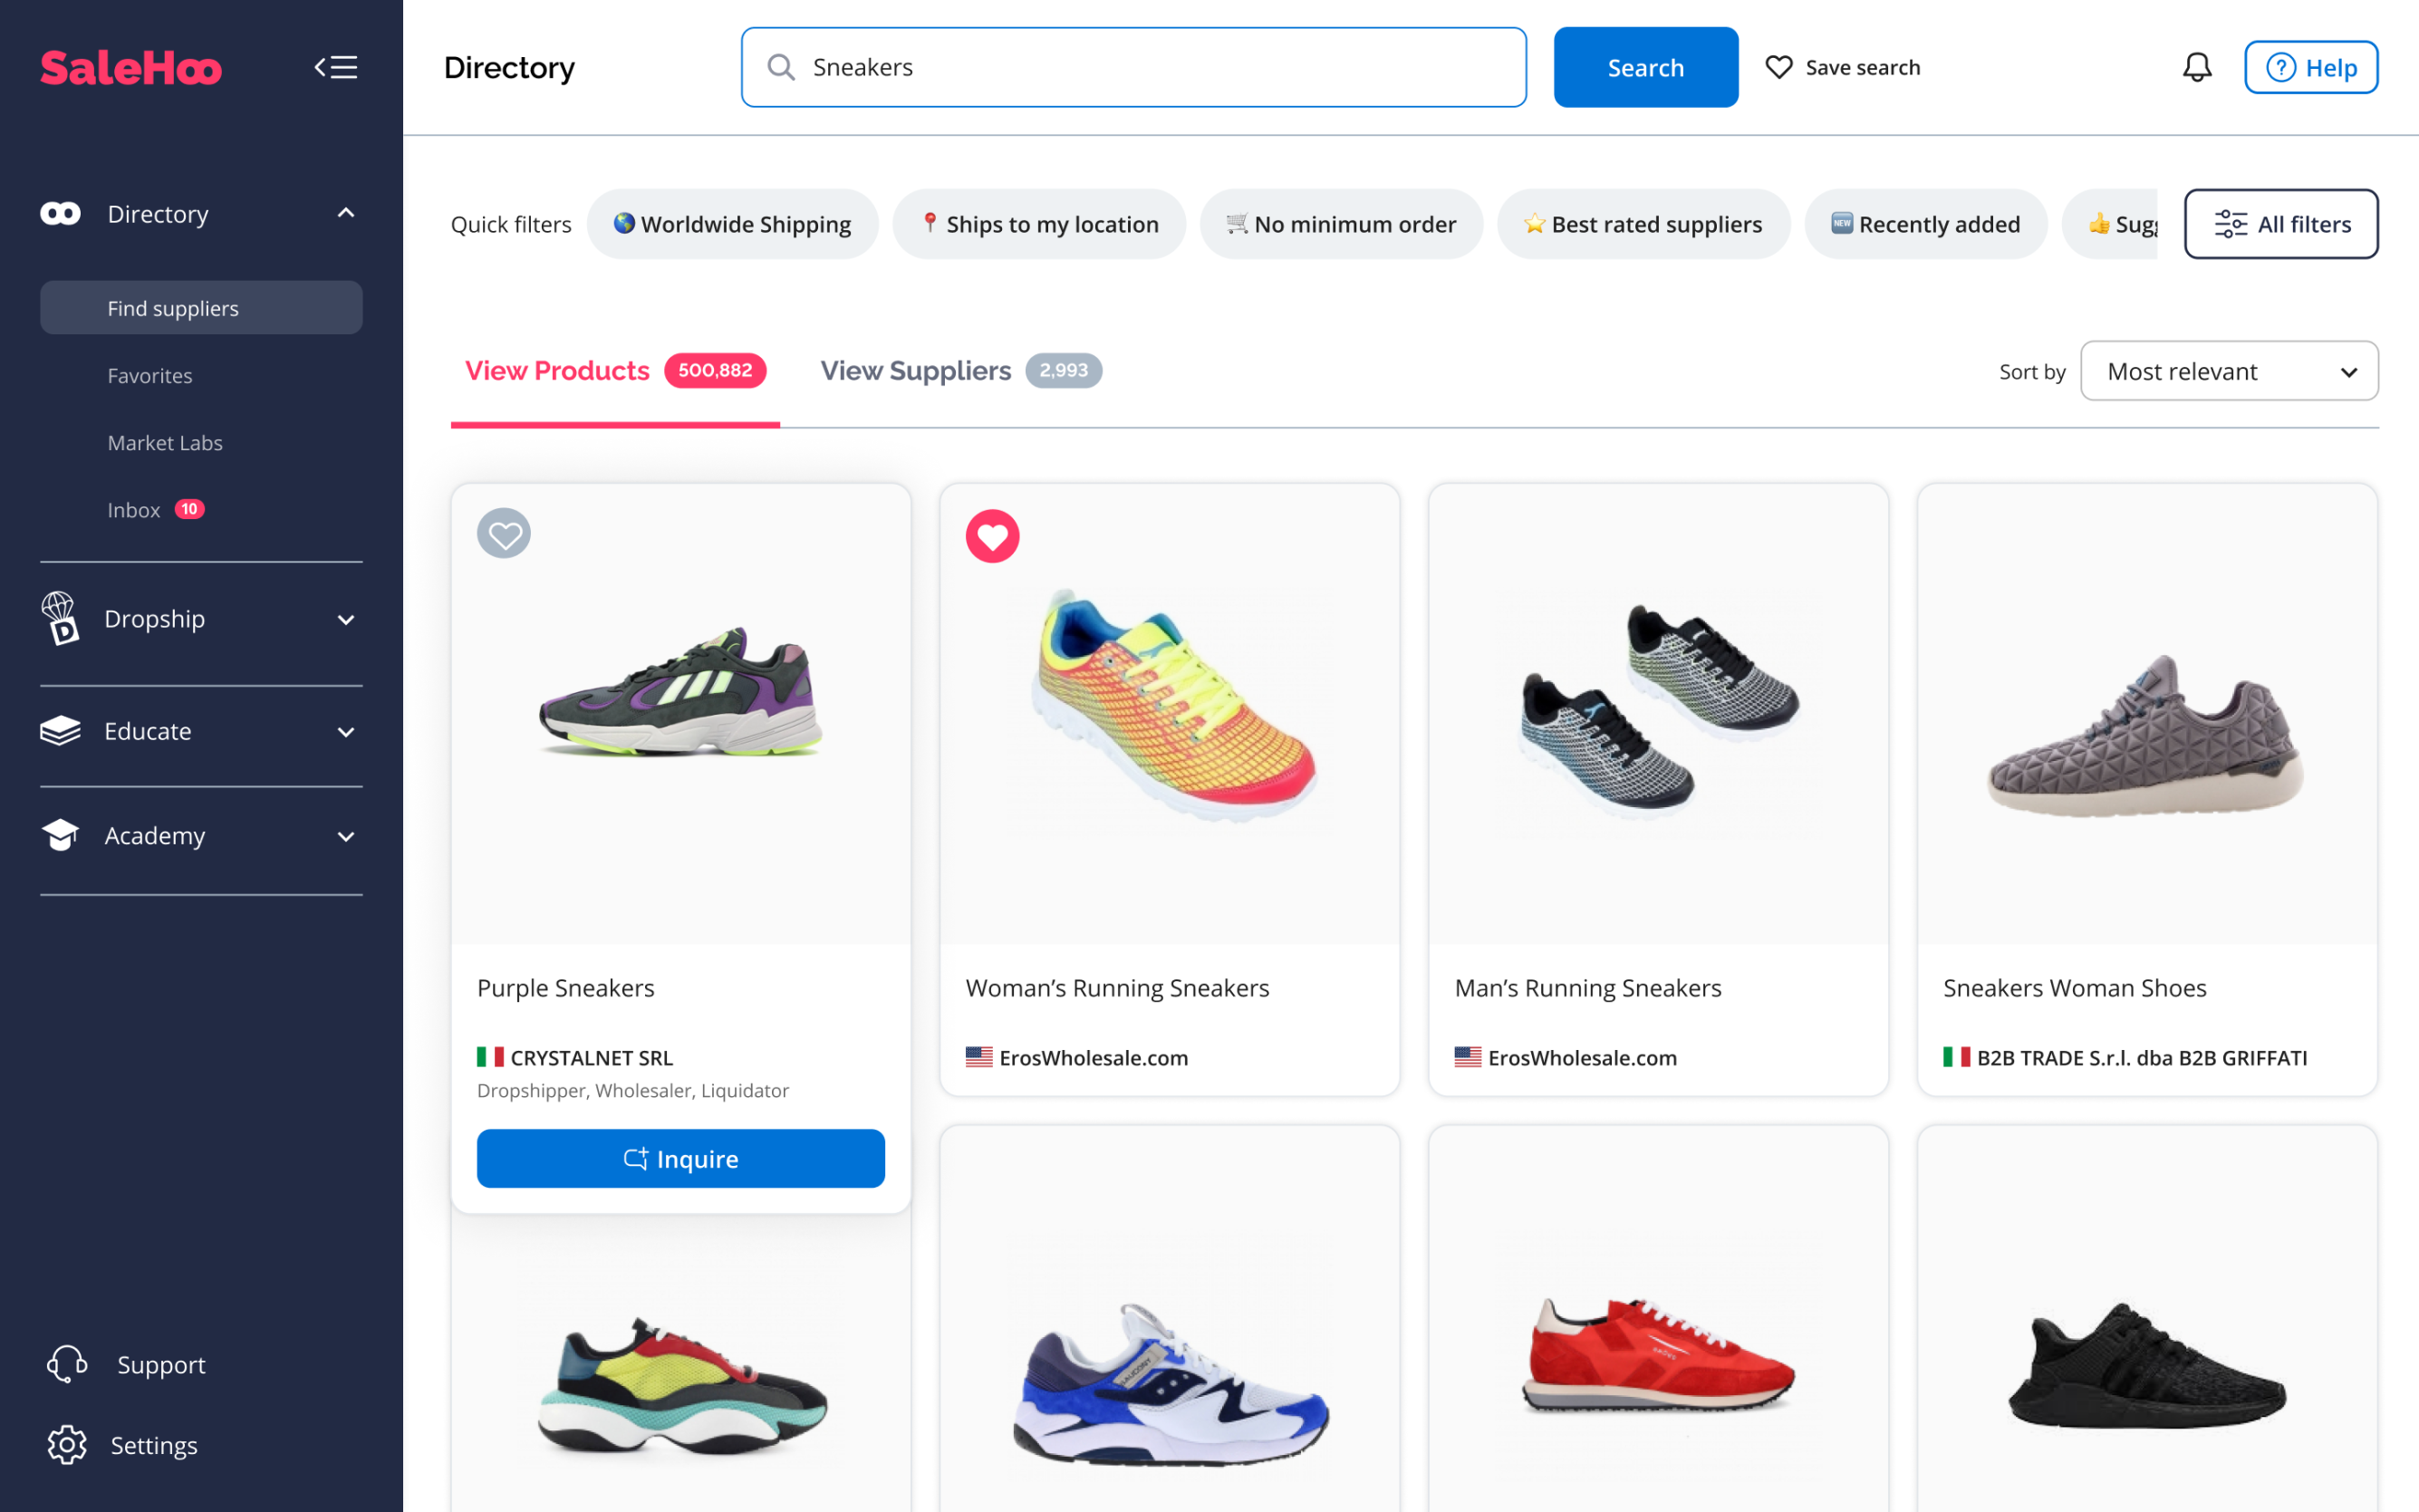 eBay Dropshipping: The Ultimate Guide to Dropshipping on eBay